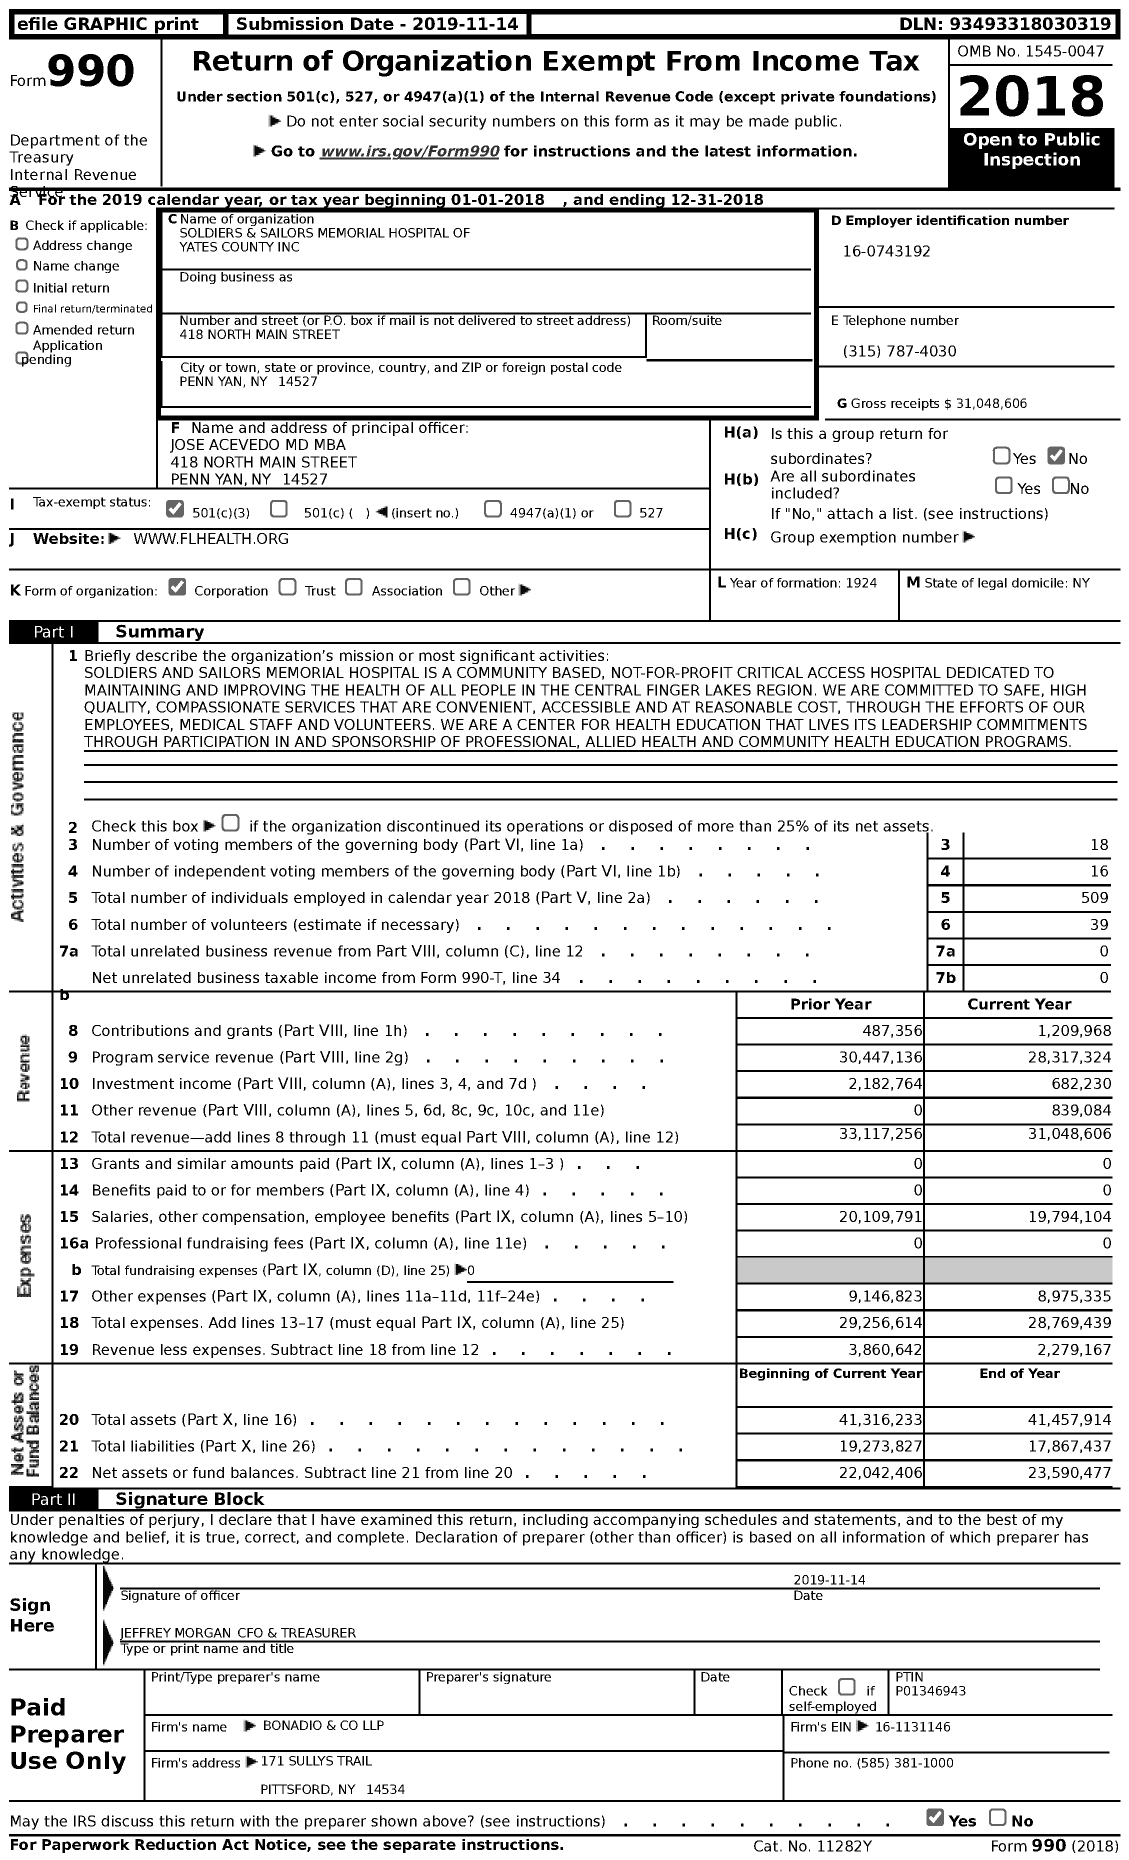 Image of first page of 2018 Form 990 for Soldiers and Sailors Memorial Hospital of Yates County